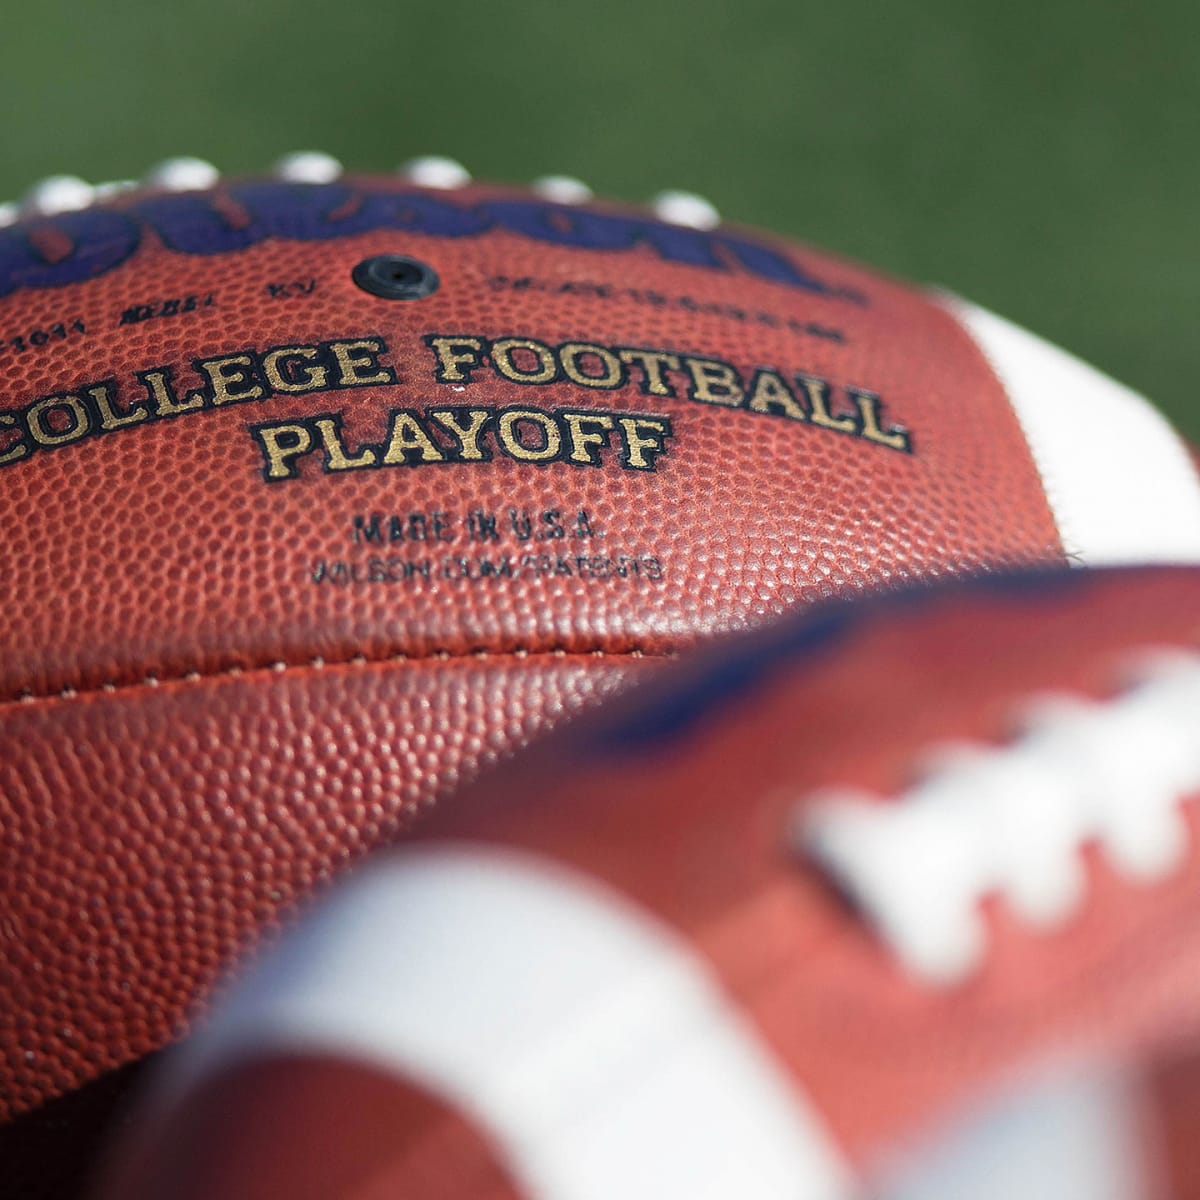 The expanded college football playoff that wasn't: A fantasy bracket